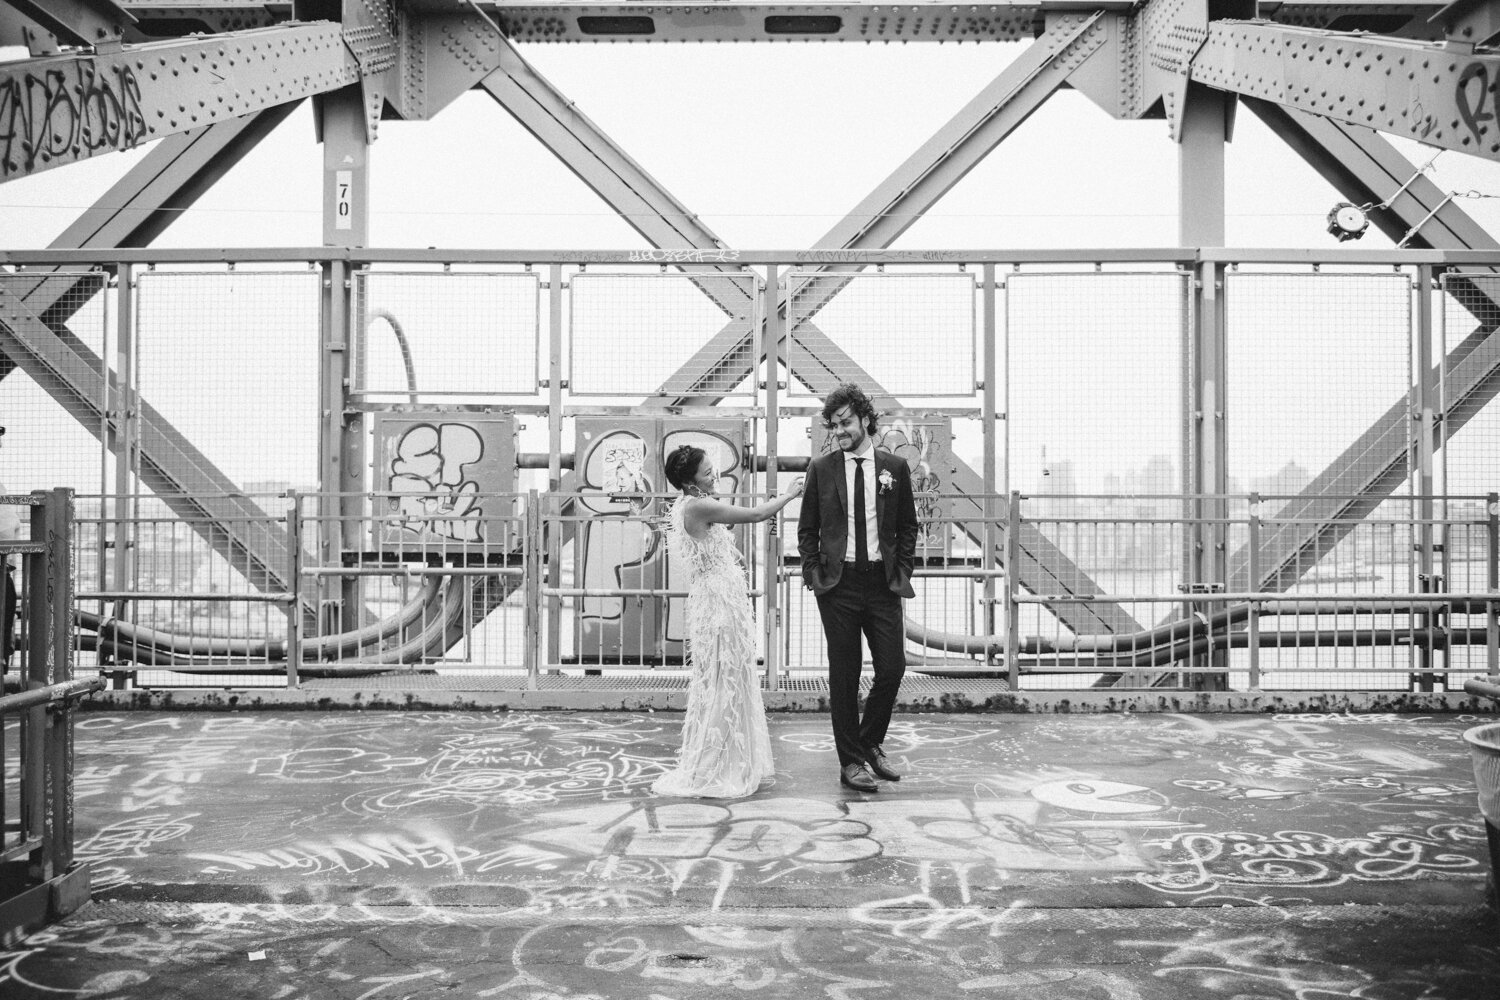 Bride taps groom on the shoulder as they both stand on the Williamsburg Bridge. 

Central Park Wedding Photography. Williamsburg Bridge Bridal Portraits. Luxury NYC Wedding Photographer. Manhattan Micro Wedding.